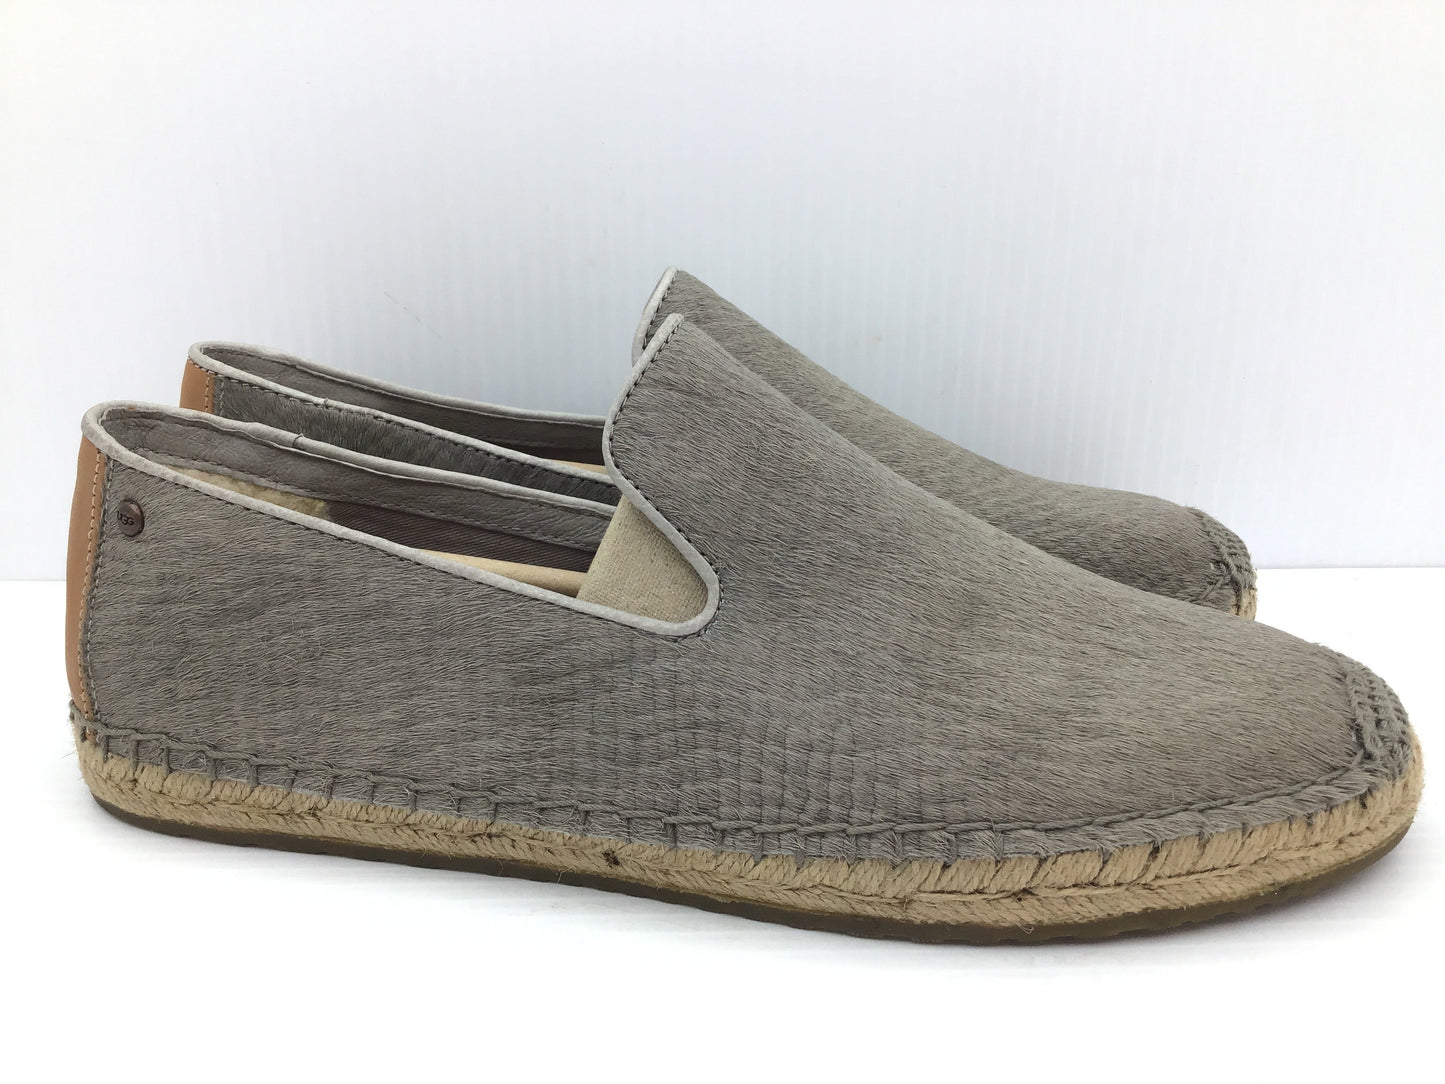 Shoes Flats Espadrille By Ugg  Size: 10